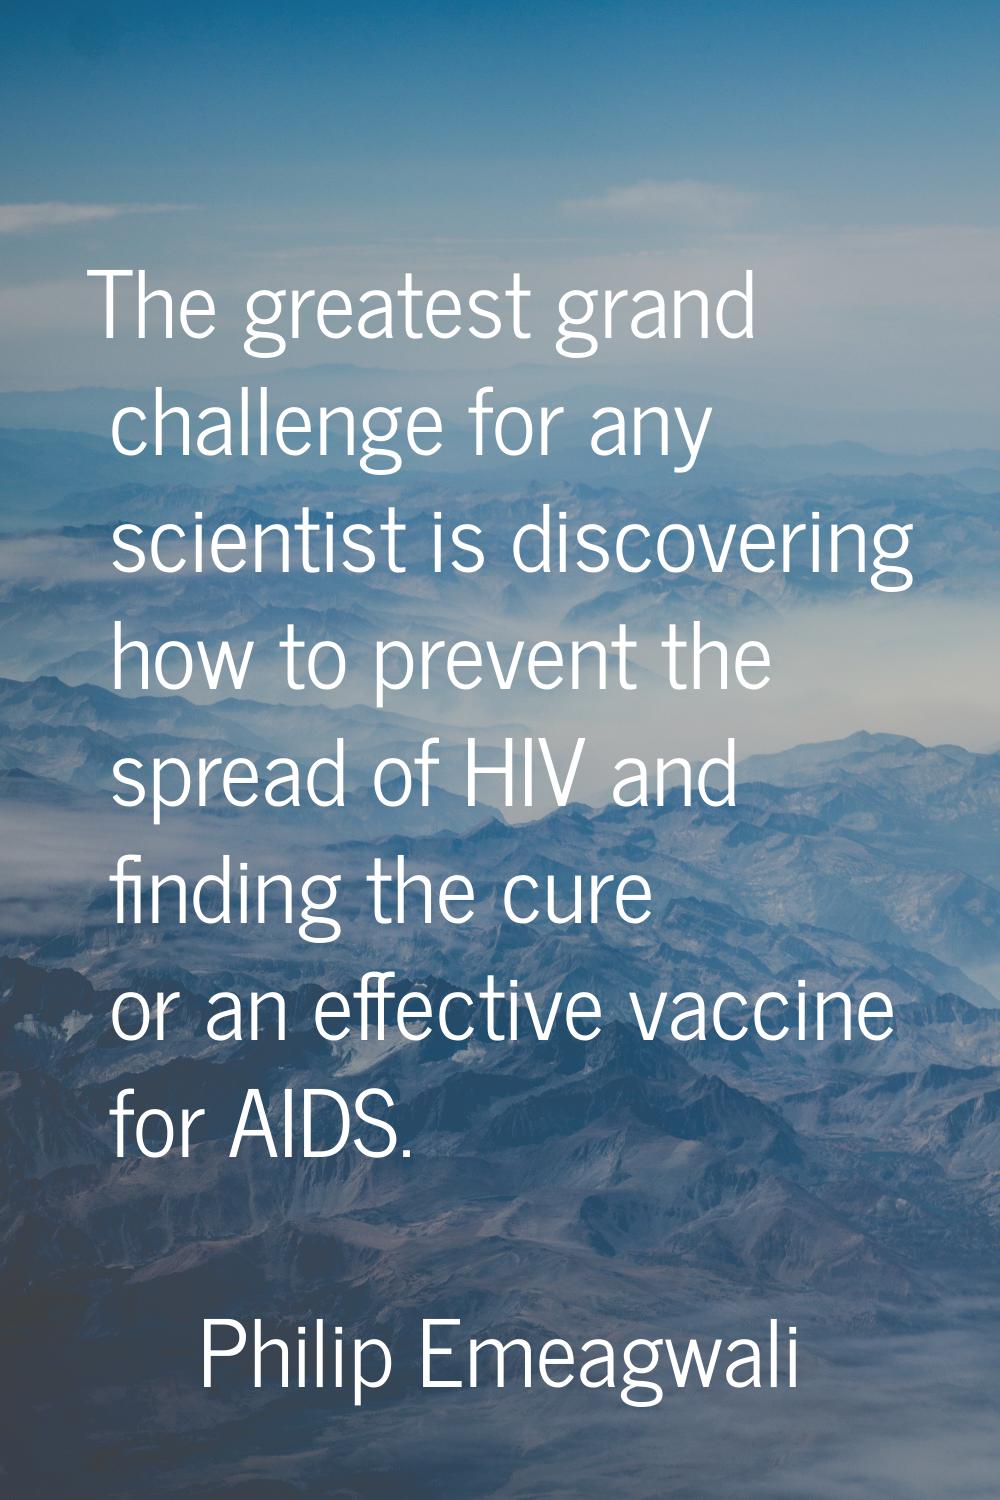 The greatest grand challenge for any scientist is discovering how to prevent the spread of HIV and 